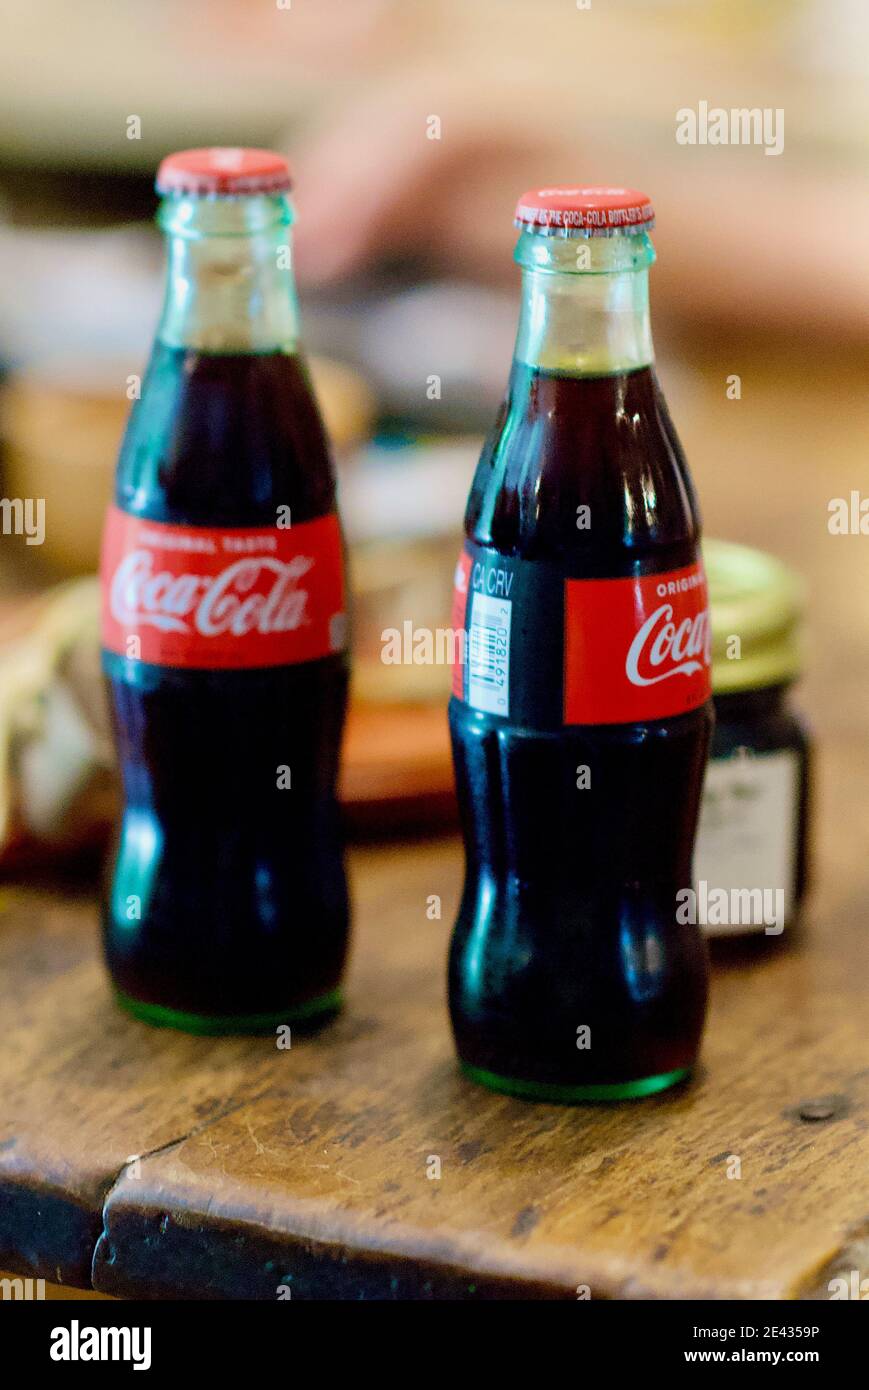 Mayberry, Virginia / USA - July 5, 2020: Two glass bottles of ice cold Coca-Cola on a worn wooden table at the historic Mayberry Trading Post. Stock Photo